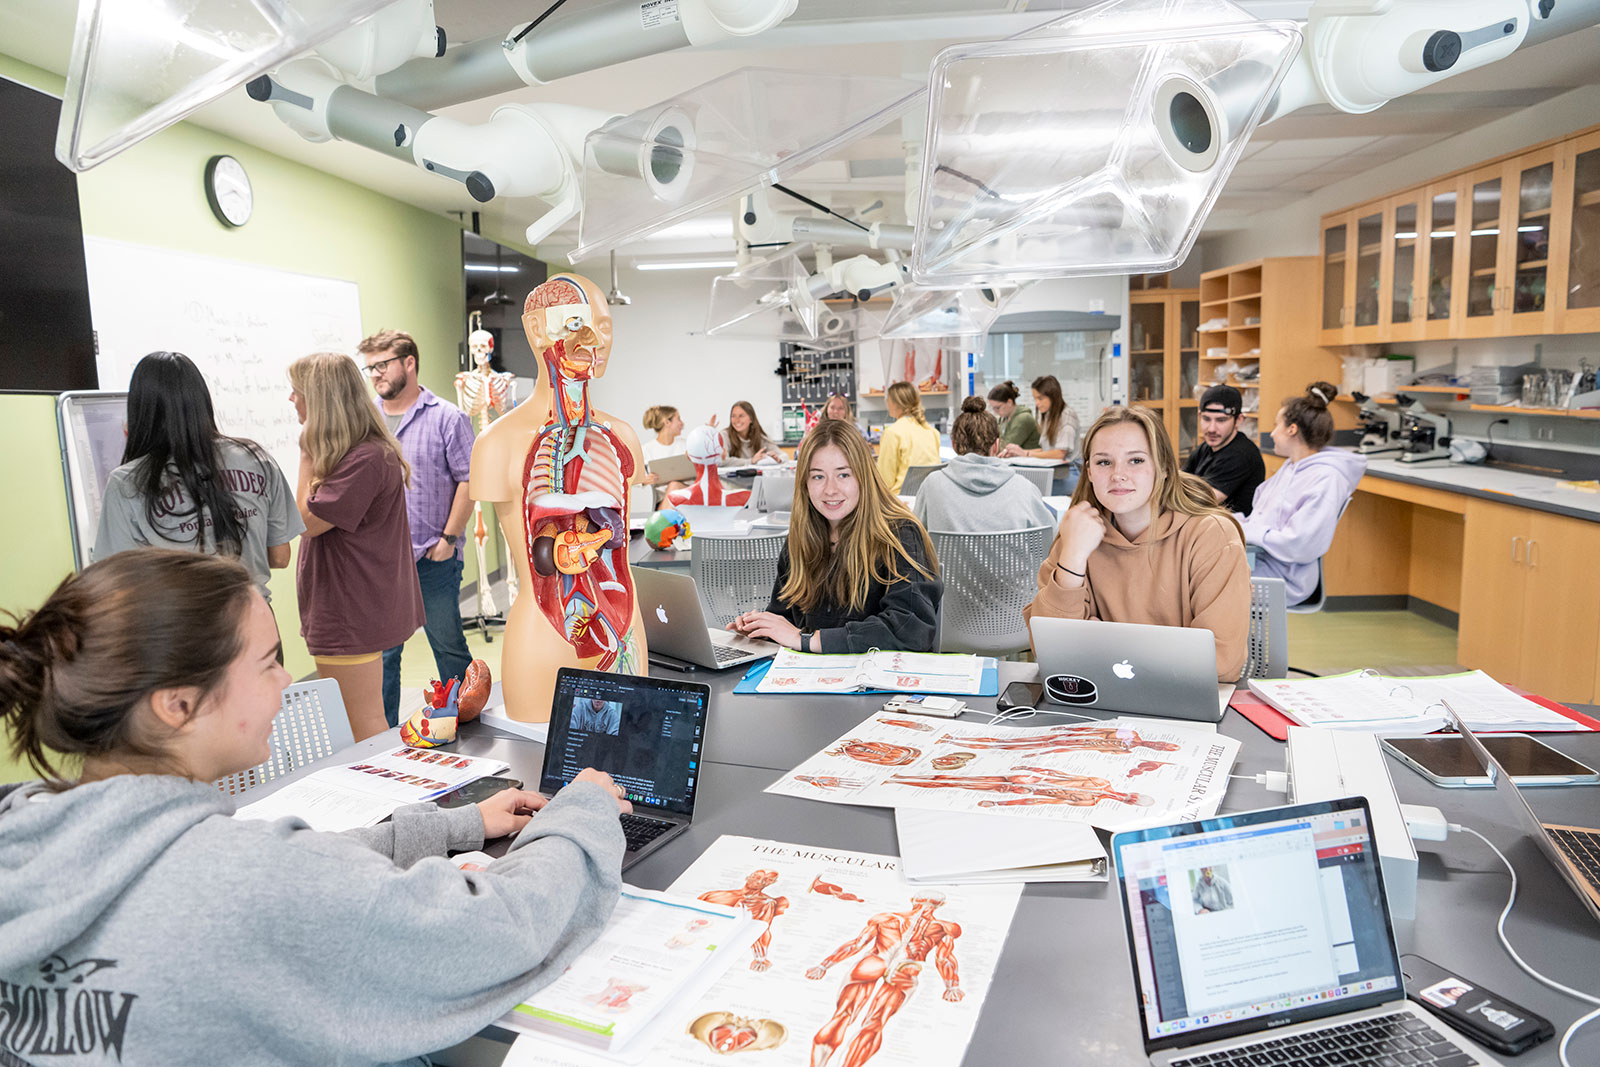 In an anatomy classroom, students are gathered around a table, diligently studying with an anatomical model.